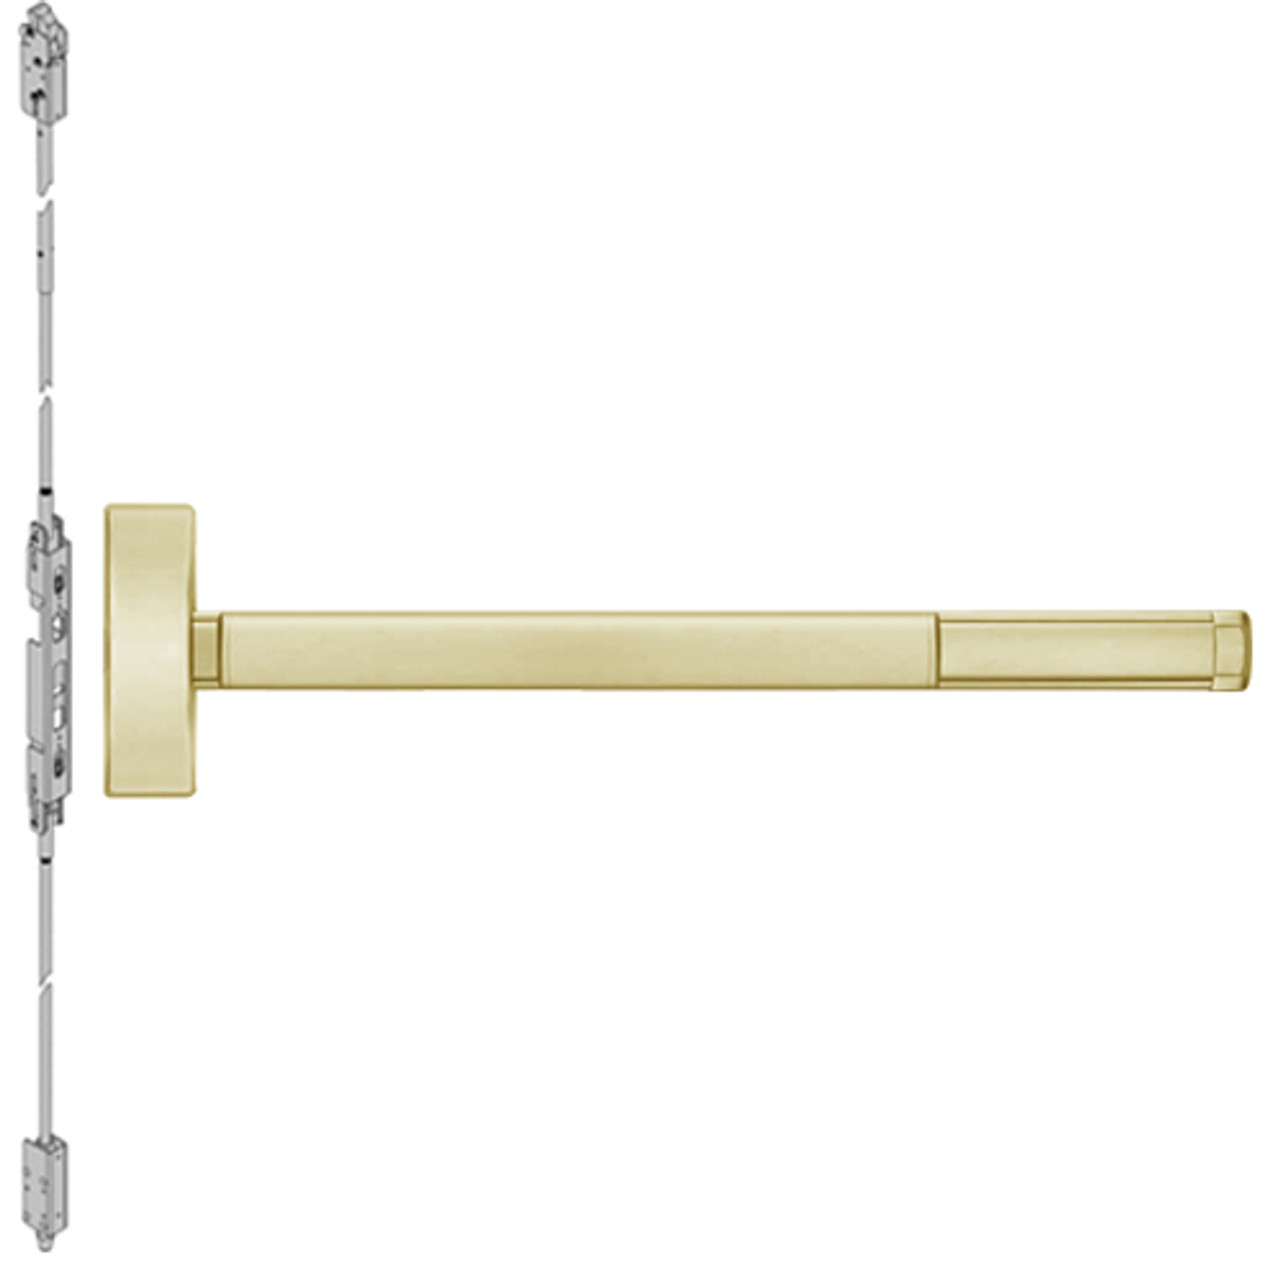 ELRFL2808-606-36 PHI 2800 Series Fire Rated Concealed Vertical Rod Exit Device with Electric Latch Retraction Prepped for Key Controls Lever-Knob in Satin Brass Finish